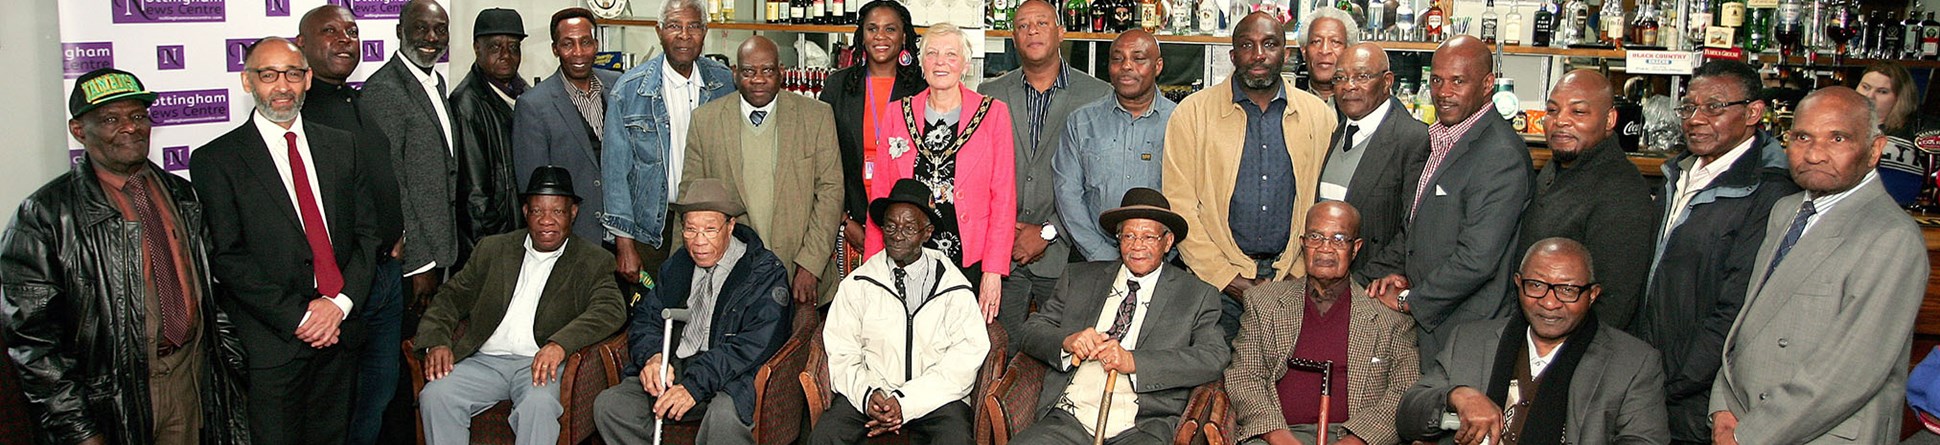 Former miners pose for a group photo at a reunion organised by the Black Miners Museum.